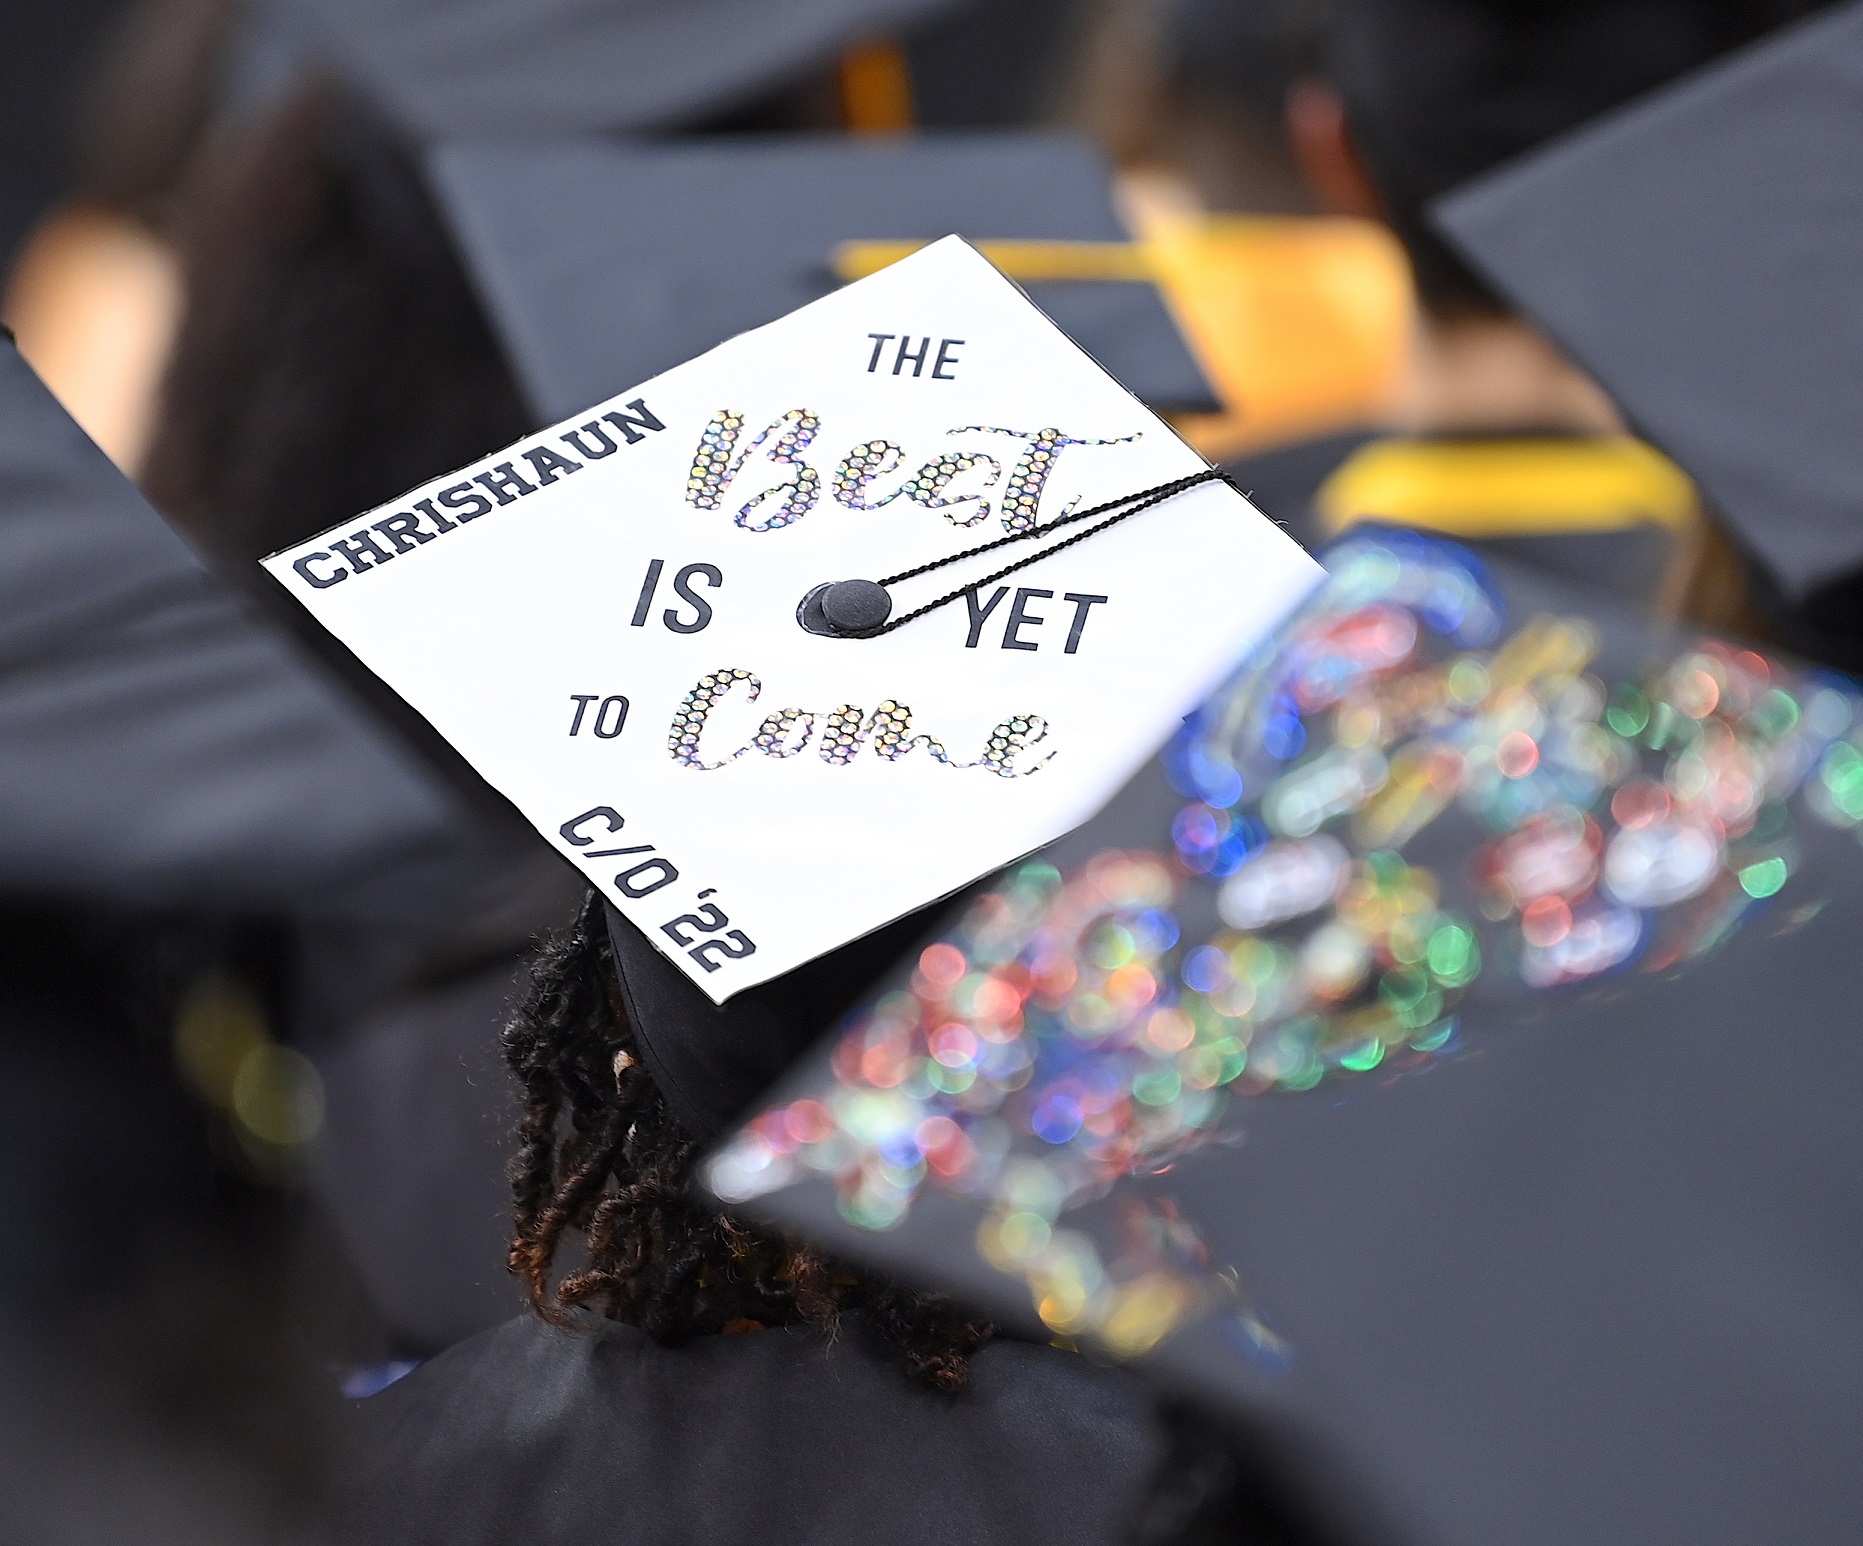 A graduation cap that says "The Best is Yet to Come"